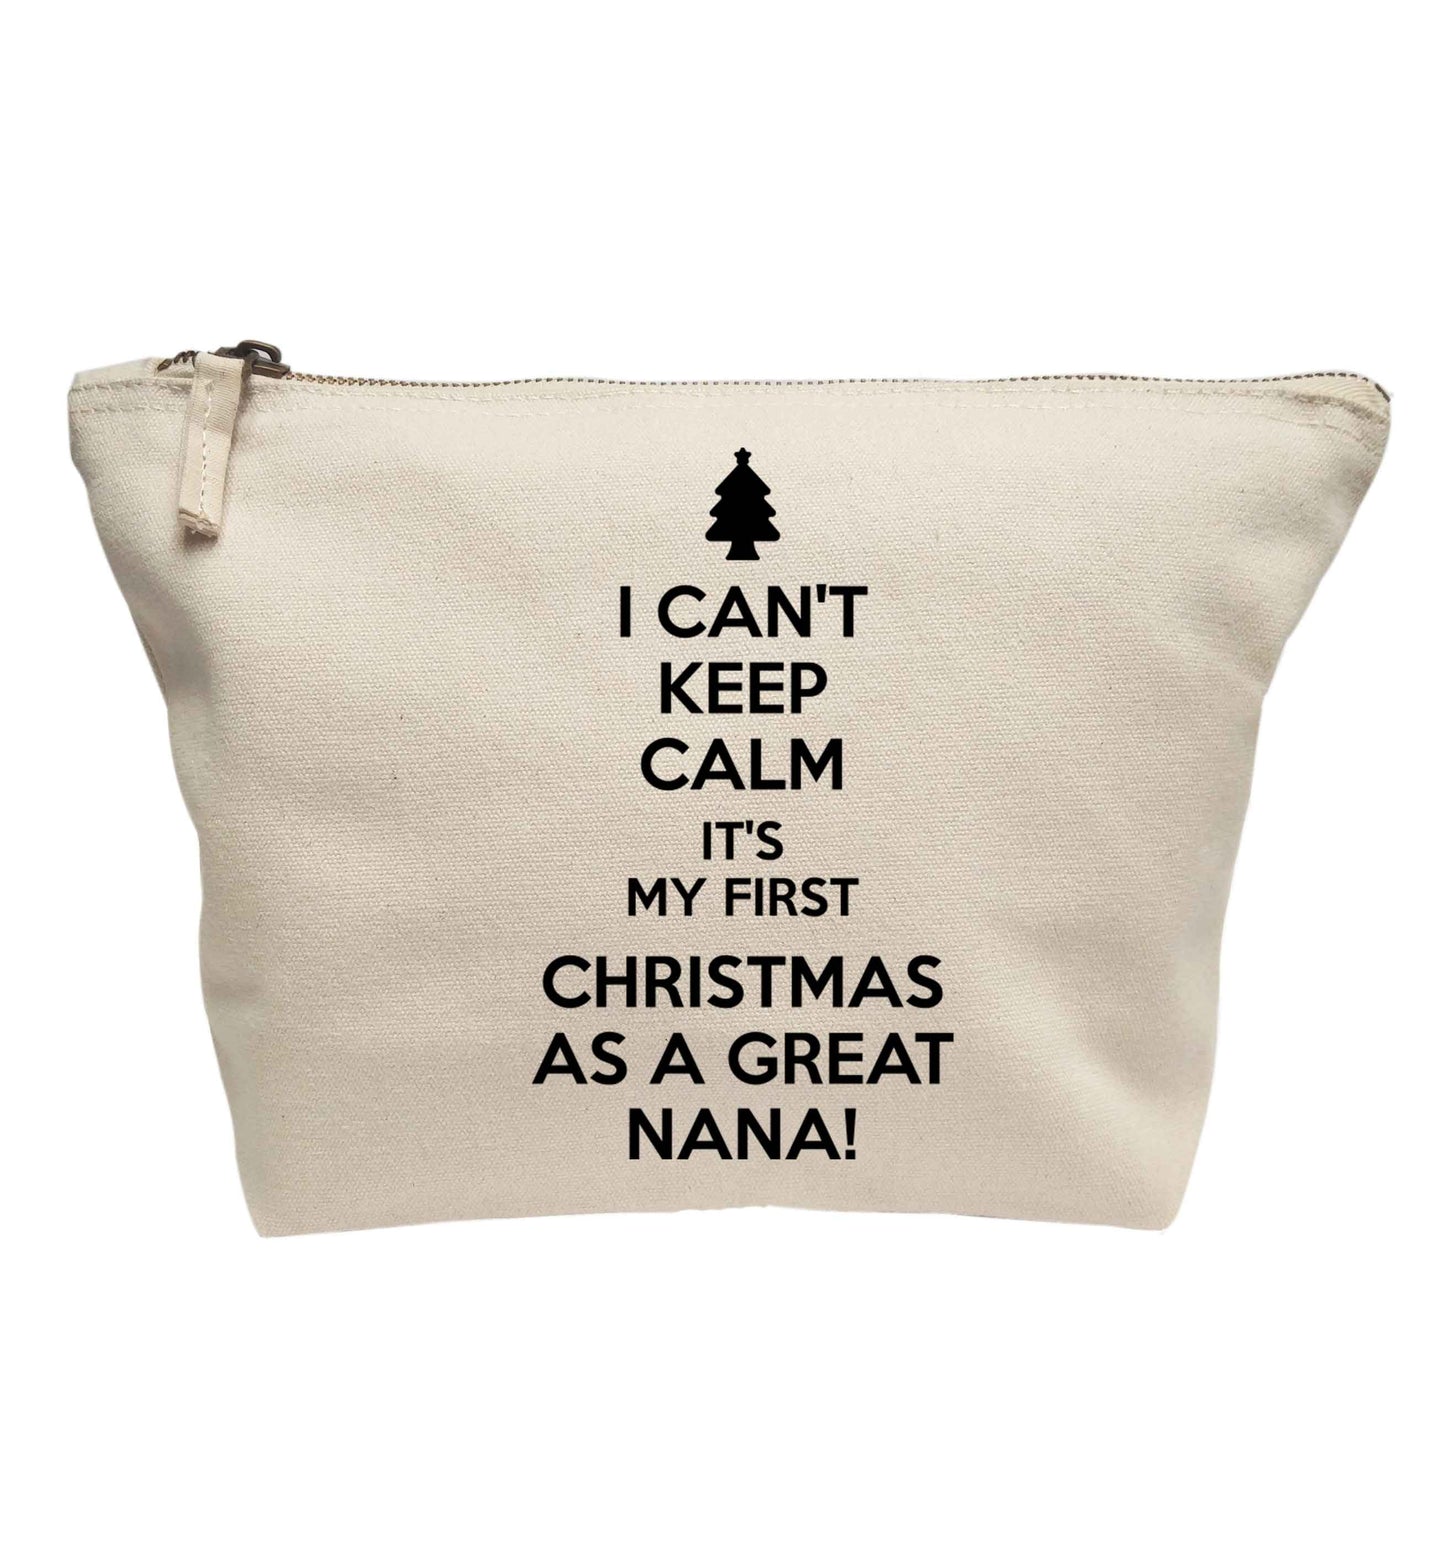 I can't keep calm it's my first Christmas as a great nana! | makeup / wash bag